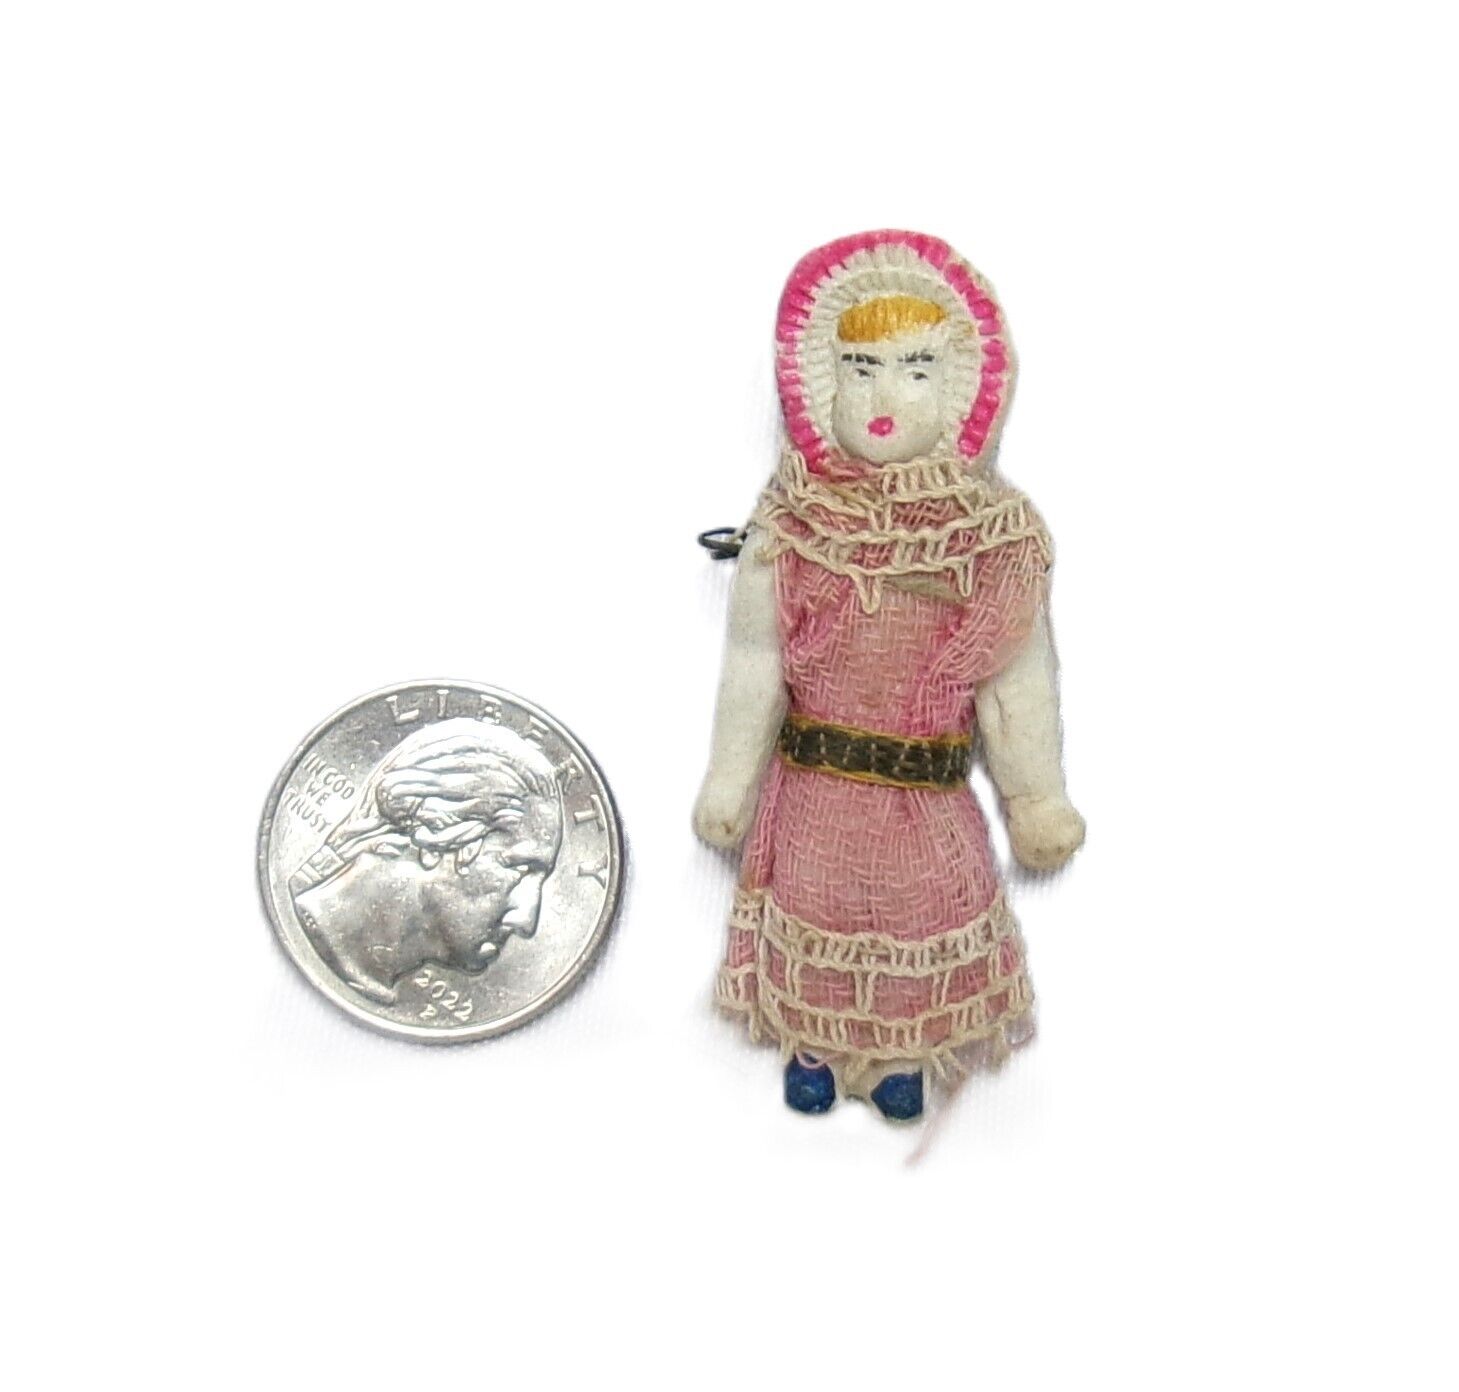 Hand Painted Antique Vintage Bisque Porcelain Miniature Jointed Doll Figurine